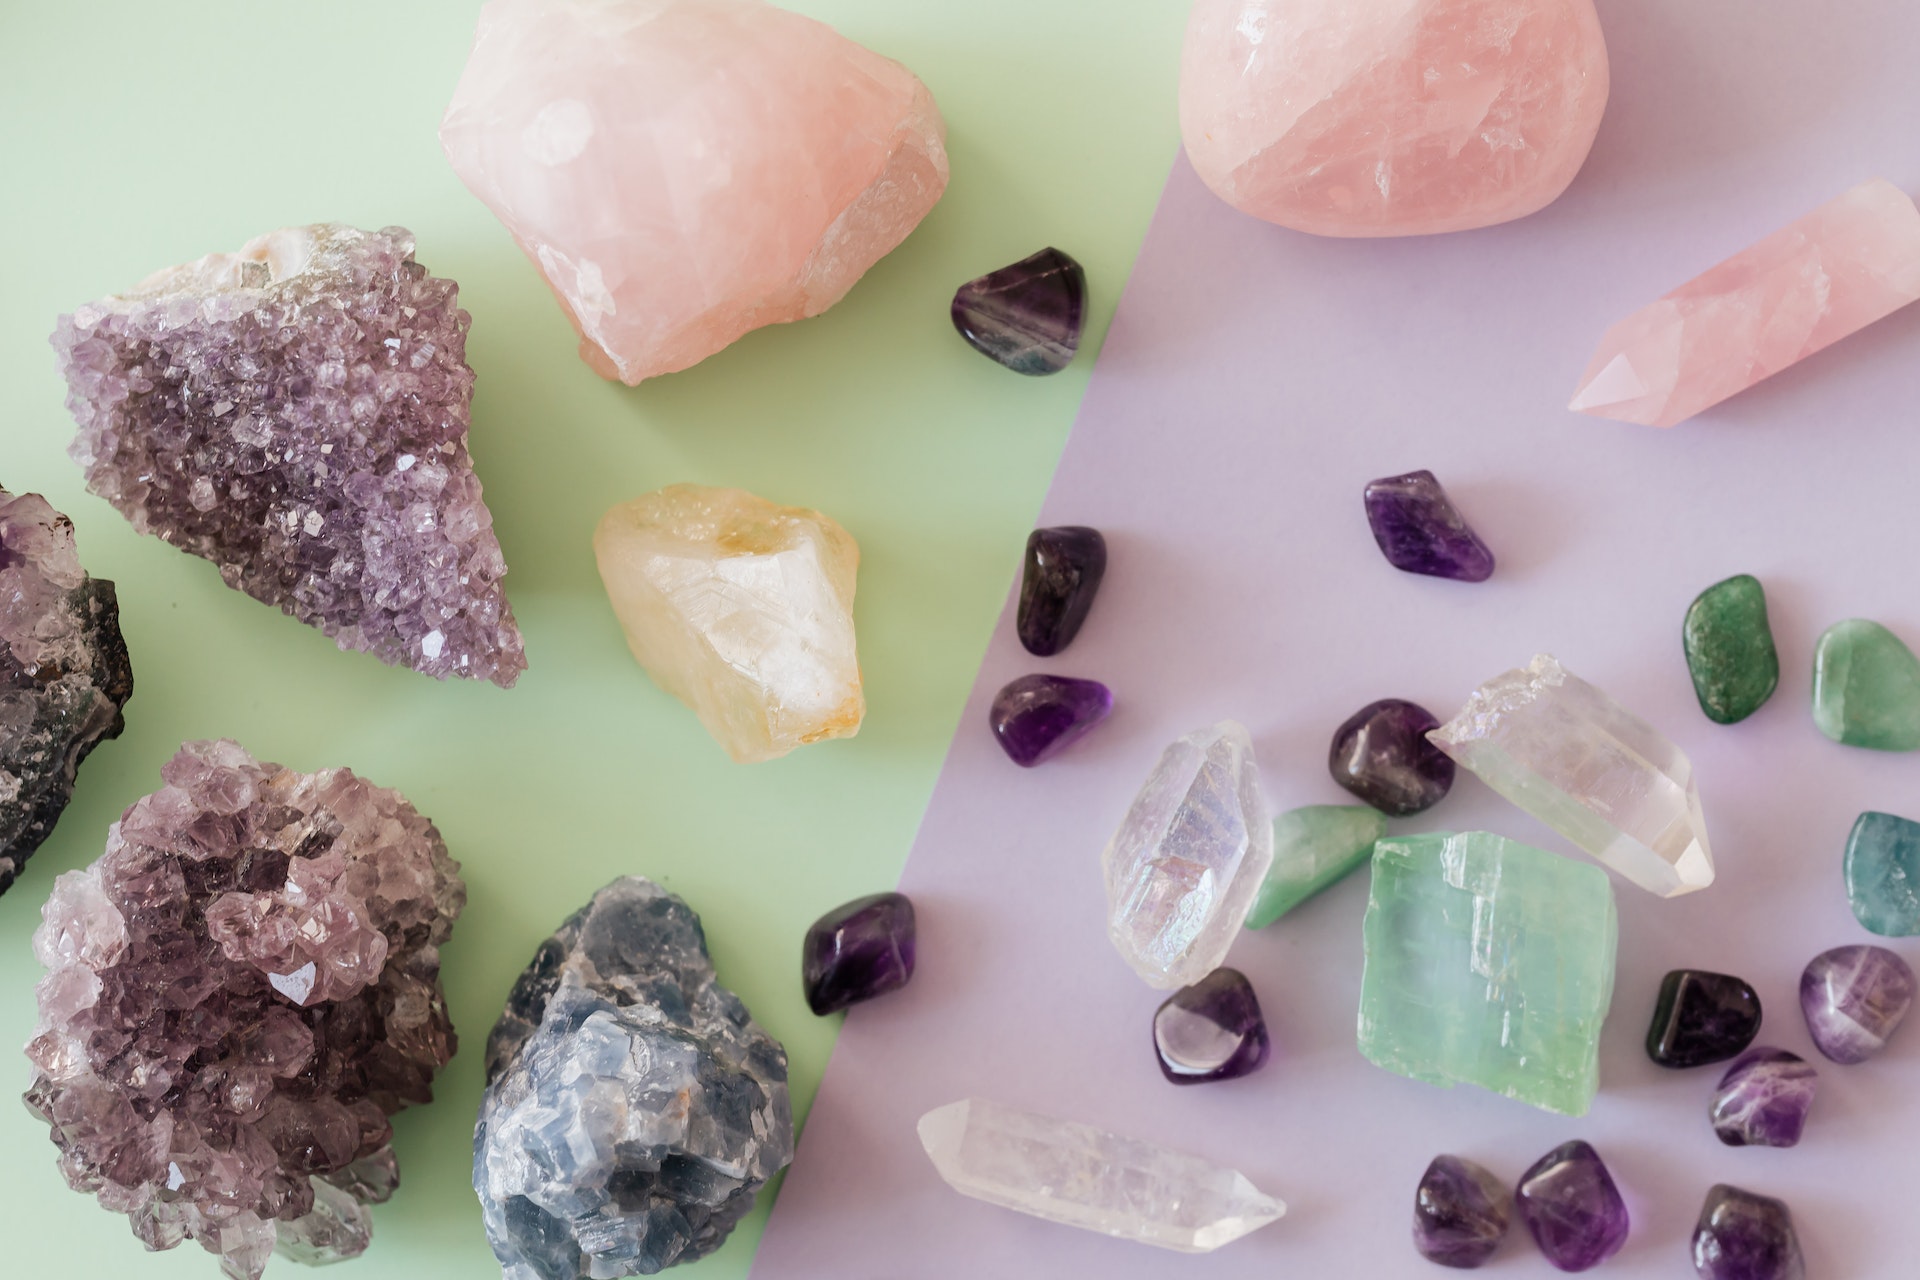 Uncut and cut crystals of different colors, shapes, and sizes laying close to each other